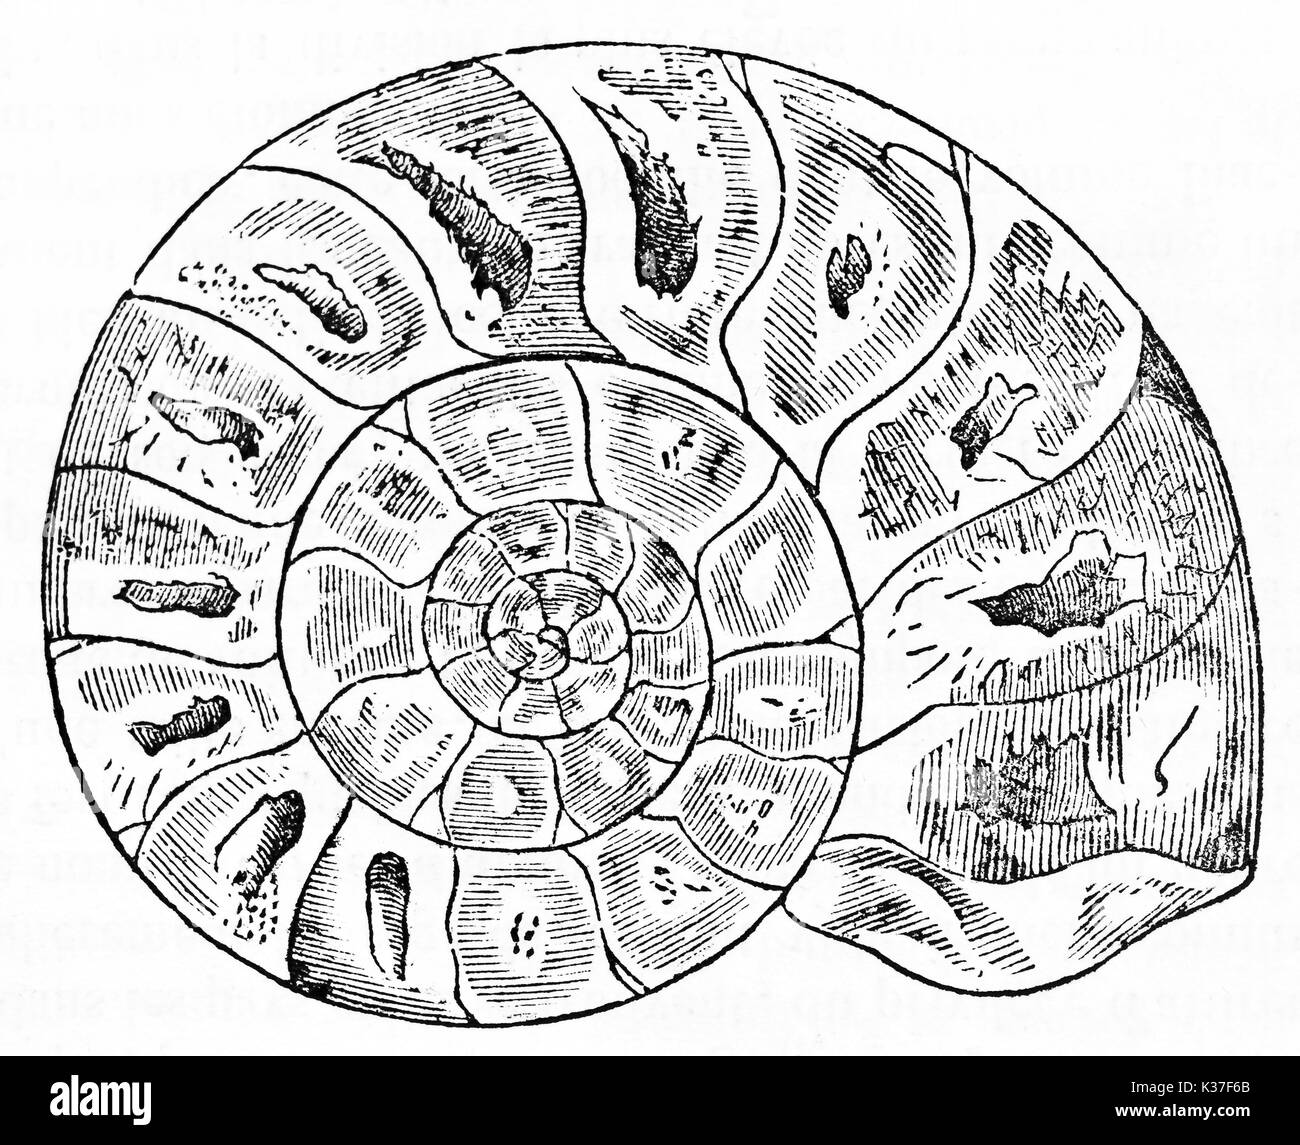 Ancient ammonite fossil depicted in a minimal graphic style and isolated. Old Illustration by unidentified author published on Magasin Pittoresque Paris 1834 Stock Photo